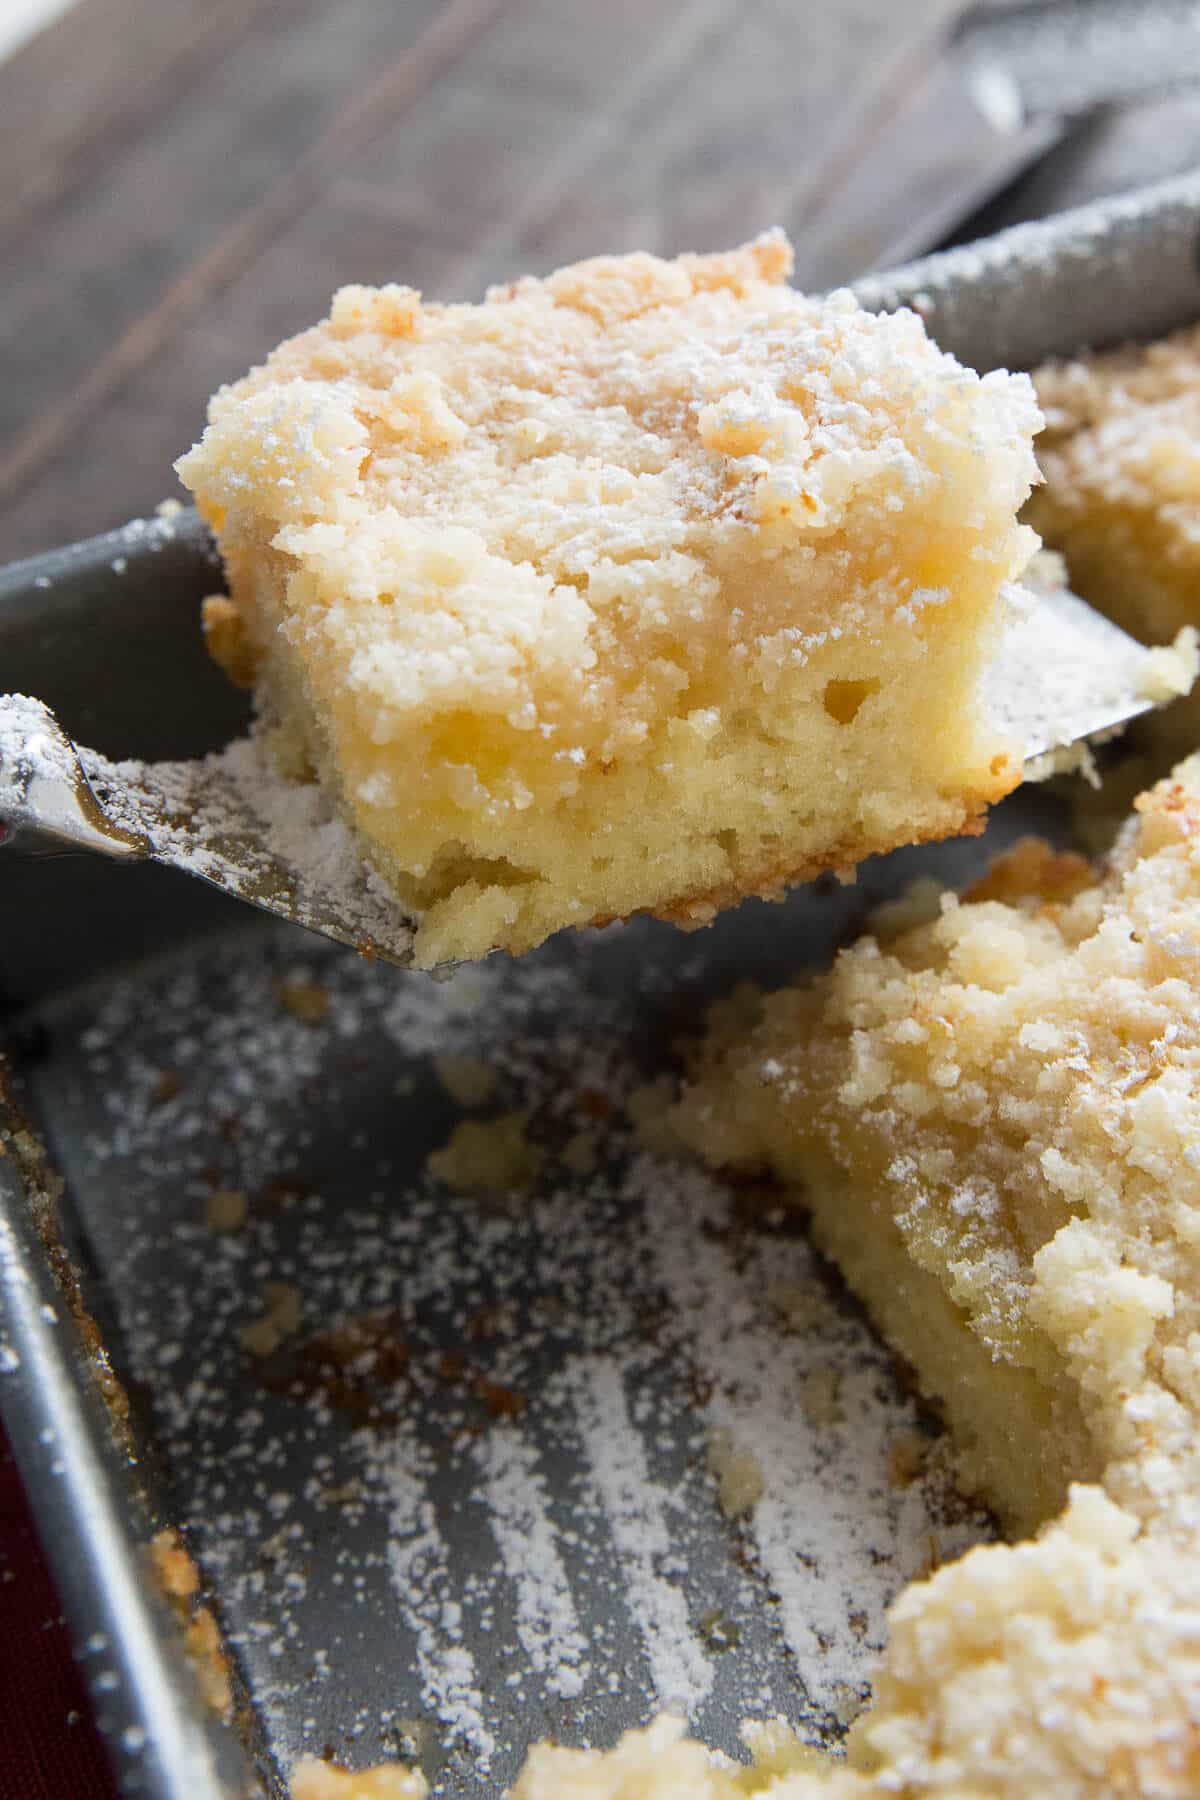 A tender crumb cake that is filled with lemon flavor cannot be beat! All it needs is a cup of tea!